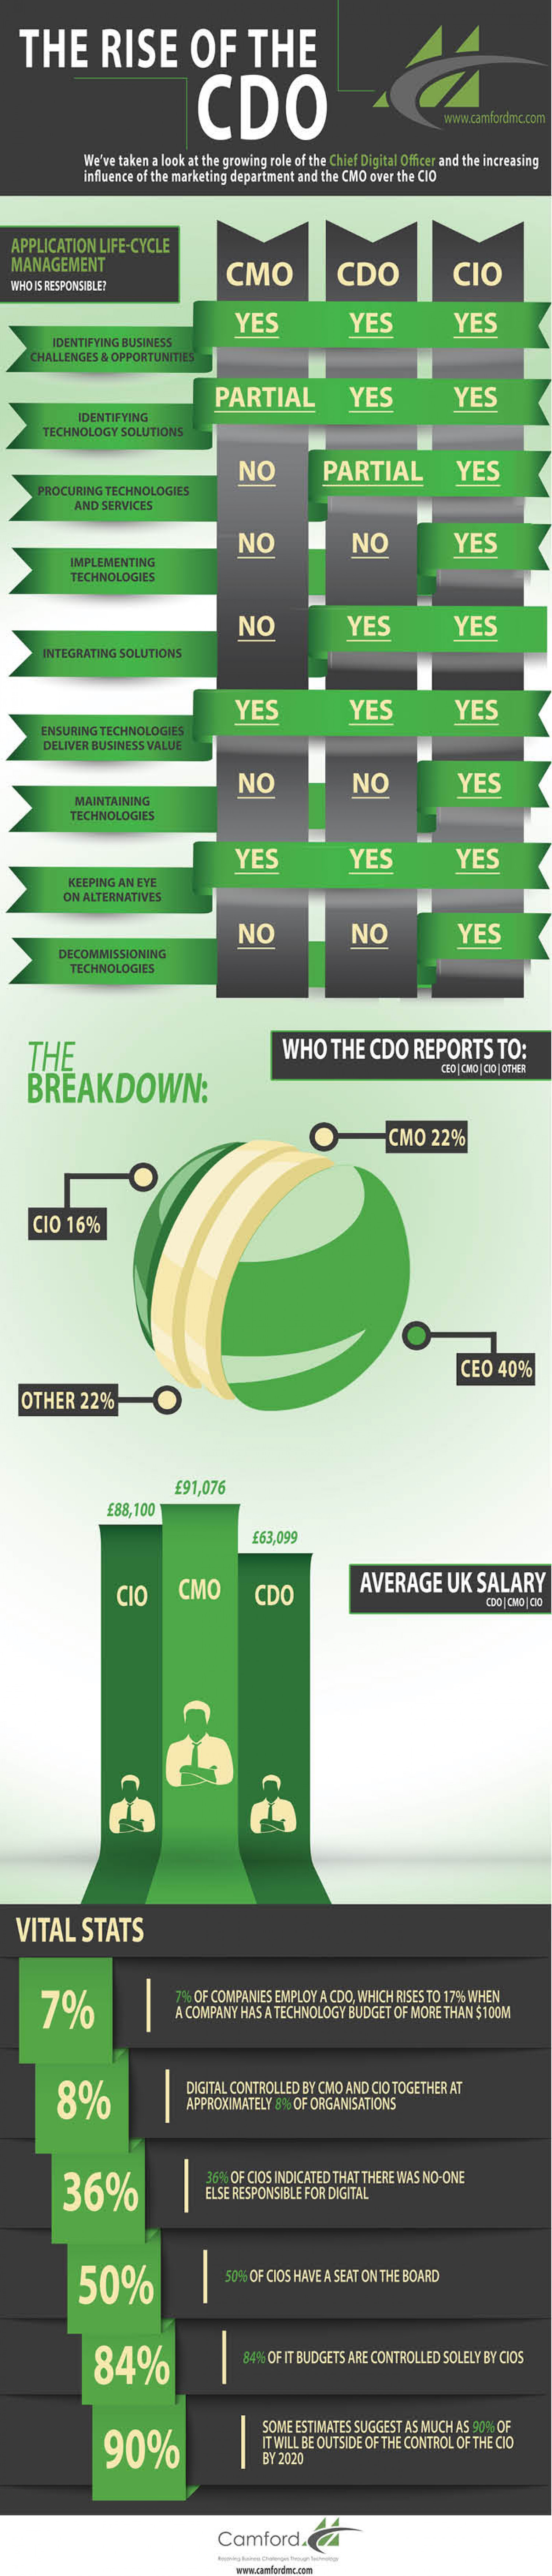 The Rise of the CDO Infographic